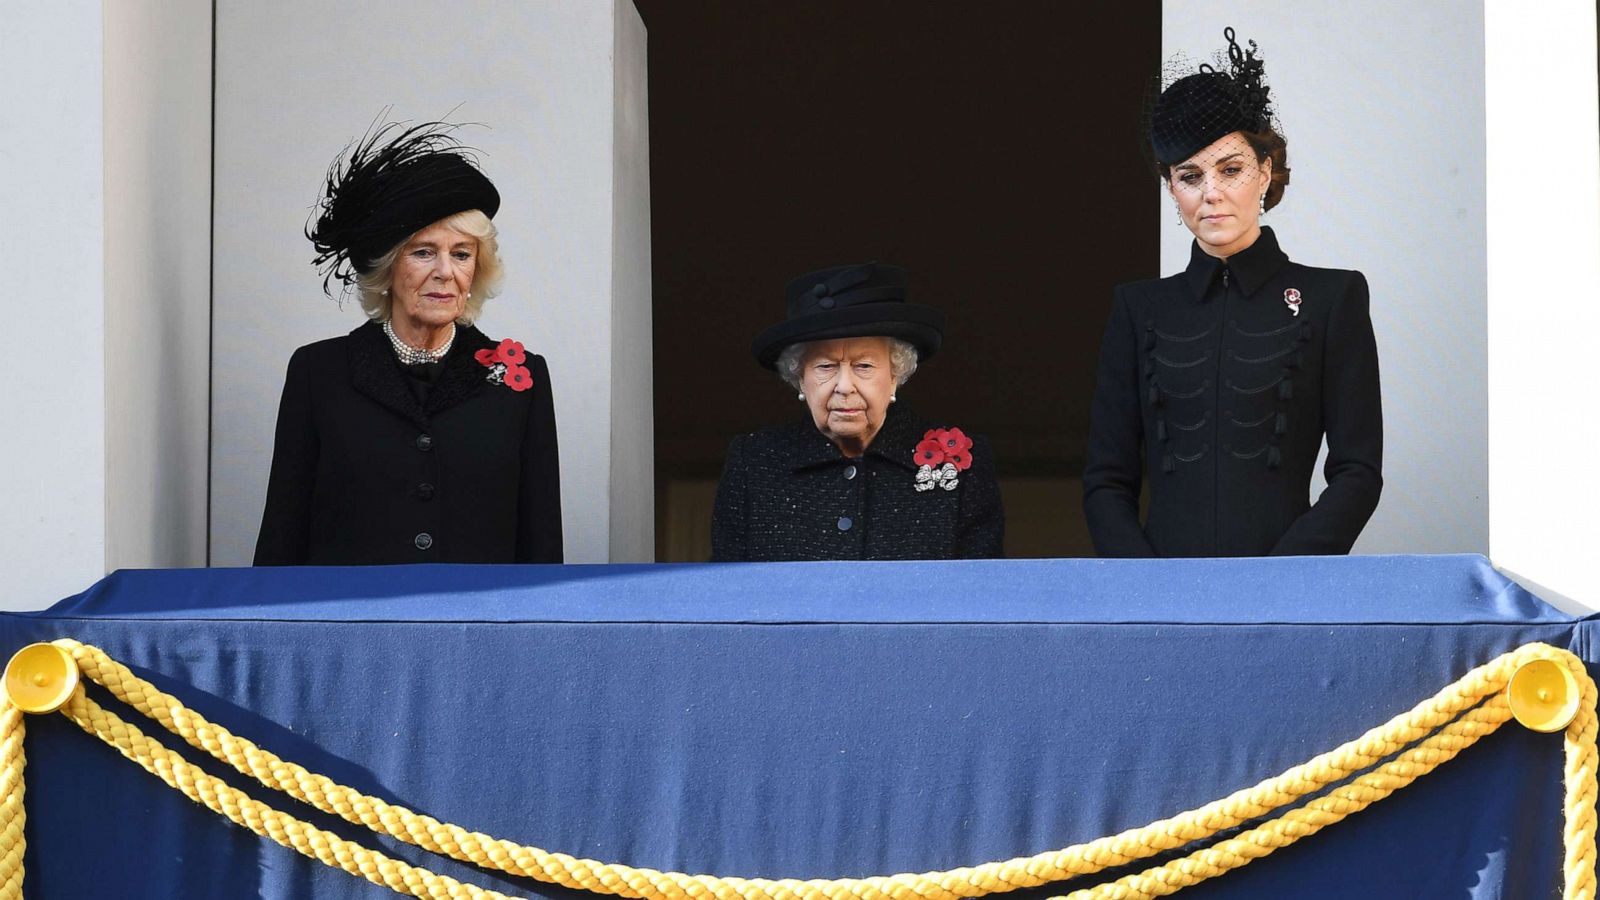 PHOTO: Camilla Duchess of Cornwall, Queen Elizabeth II and Catherine Duchess of Cambridge at the Cenotaph on Whitehall during the Remembrance Sunday day service in London, Nov. 10, 2019.